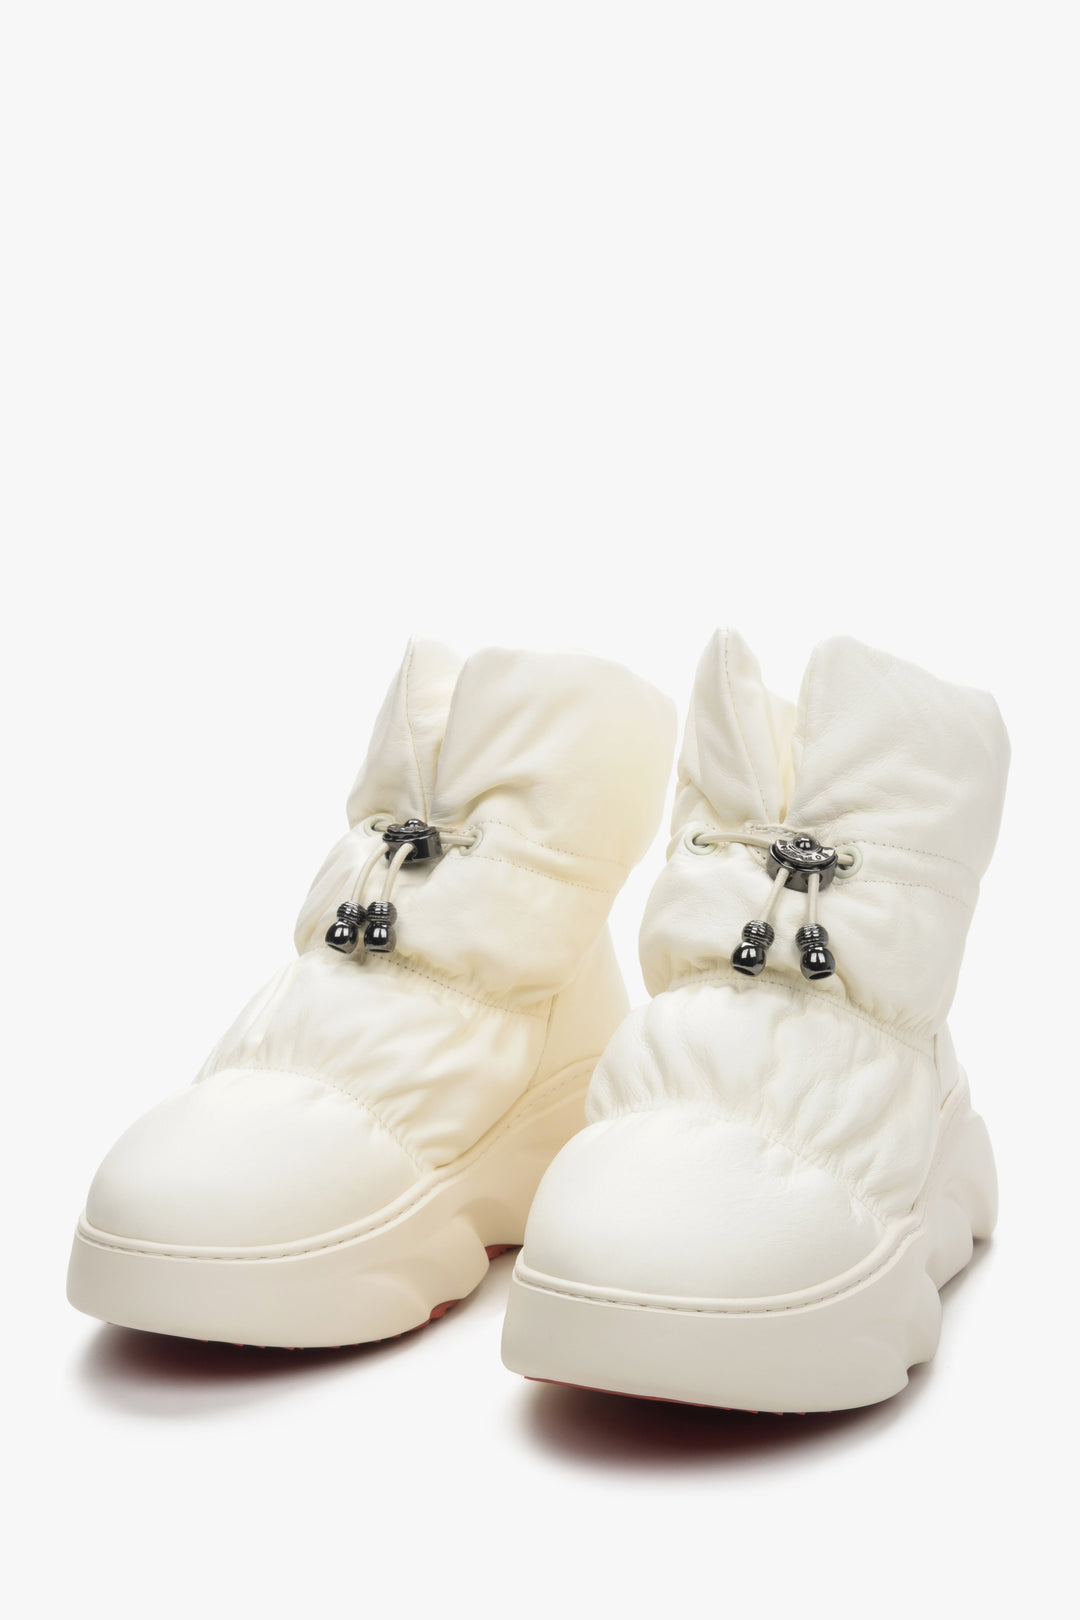 Women's light beige snow boots with leather and fur by Estro - front view of the shoe.